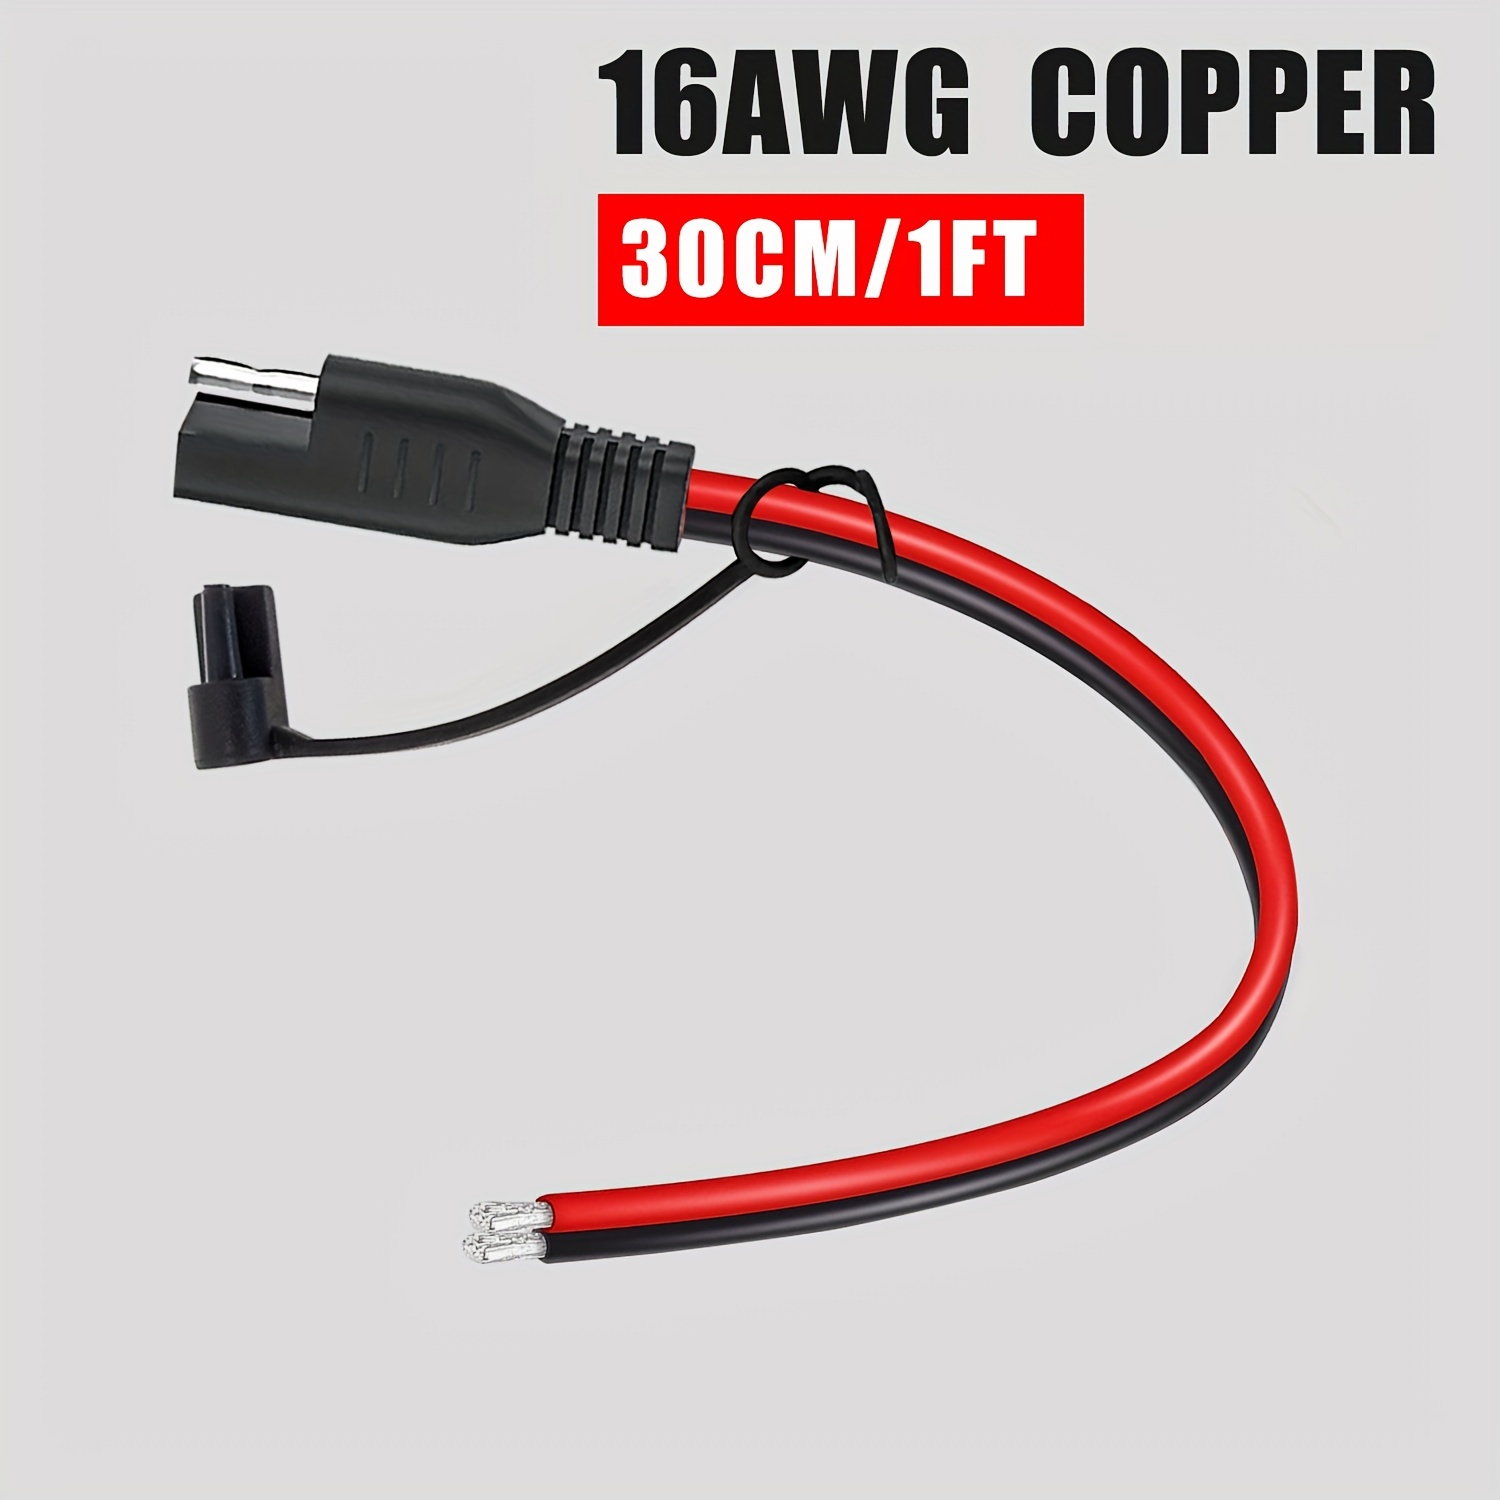 

1pc, Sae Dc Connector 1ft/30cm, 16awg Sae Single Plug Dc Quick Disconnect Power Extension Cable, Sae Extension Cable For Motorcycles, Solar Panels, Tractors, Etc